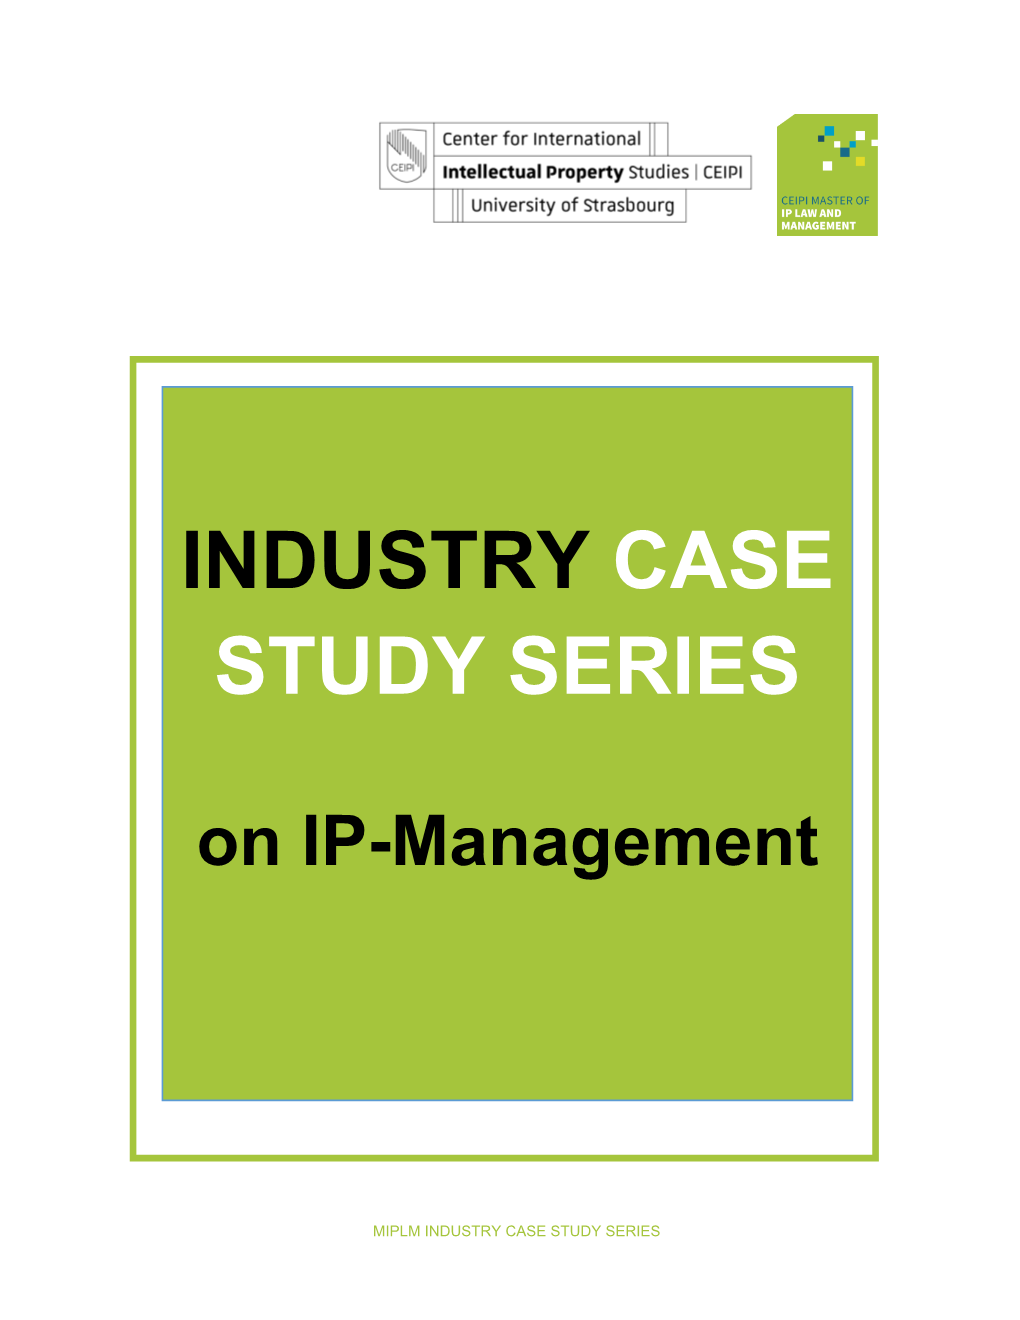 Industry Case Study Series